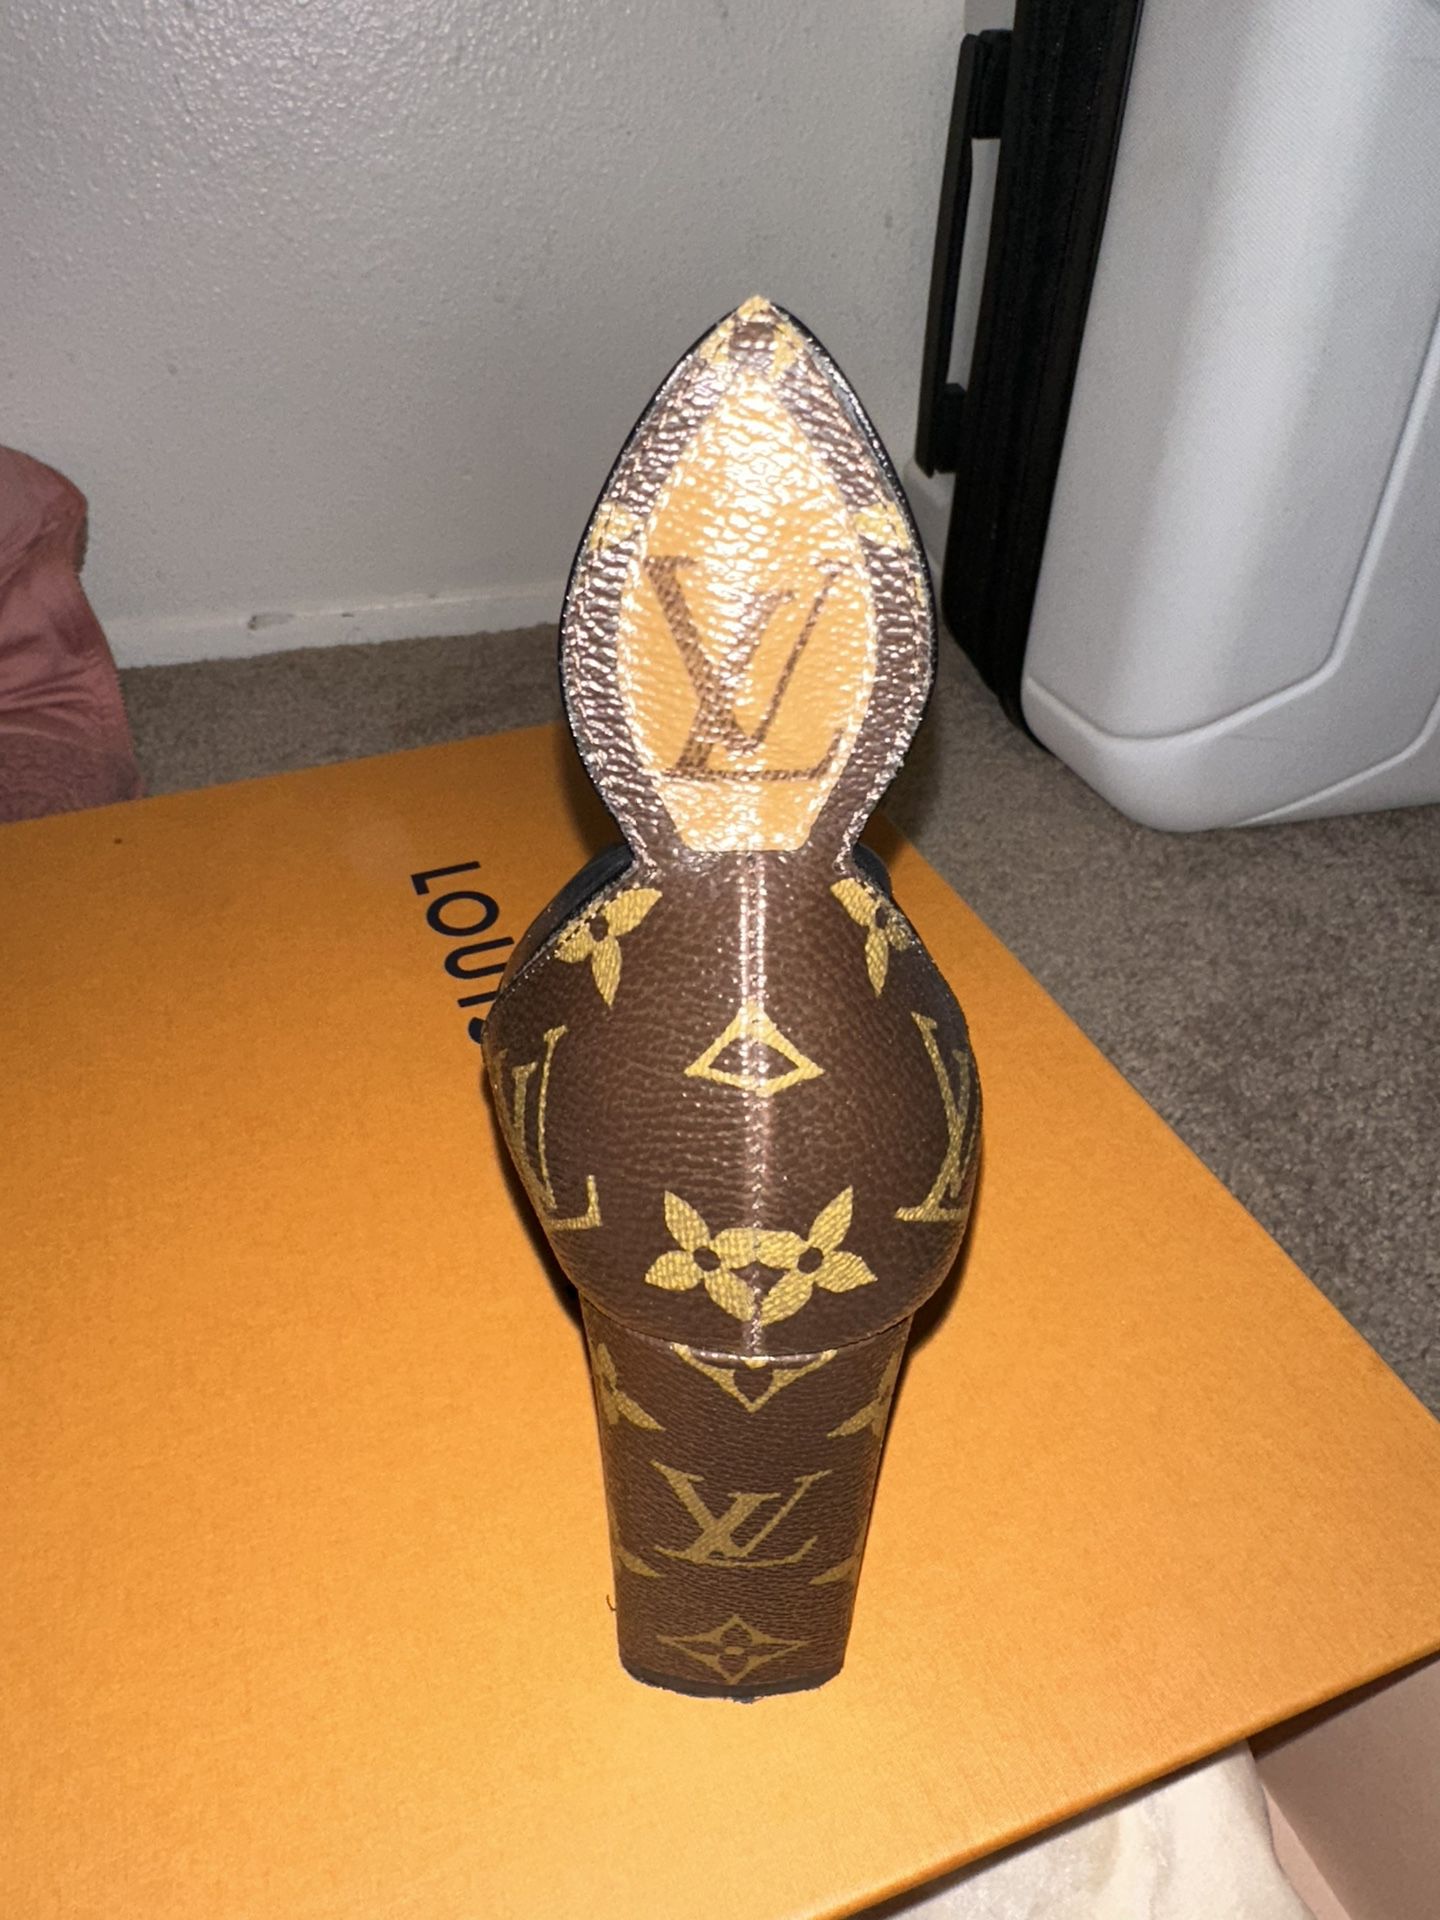 LV Louis Vuitton High heel boots for Sale in Baltimore, MD - OfferUp